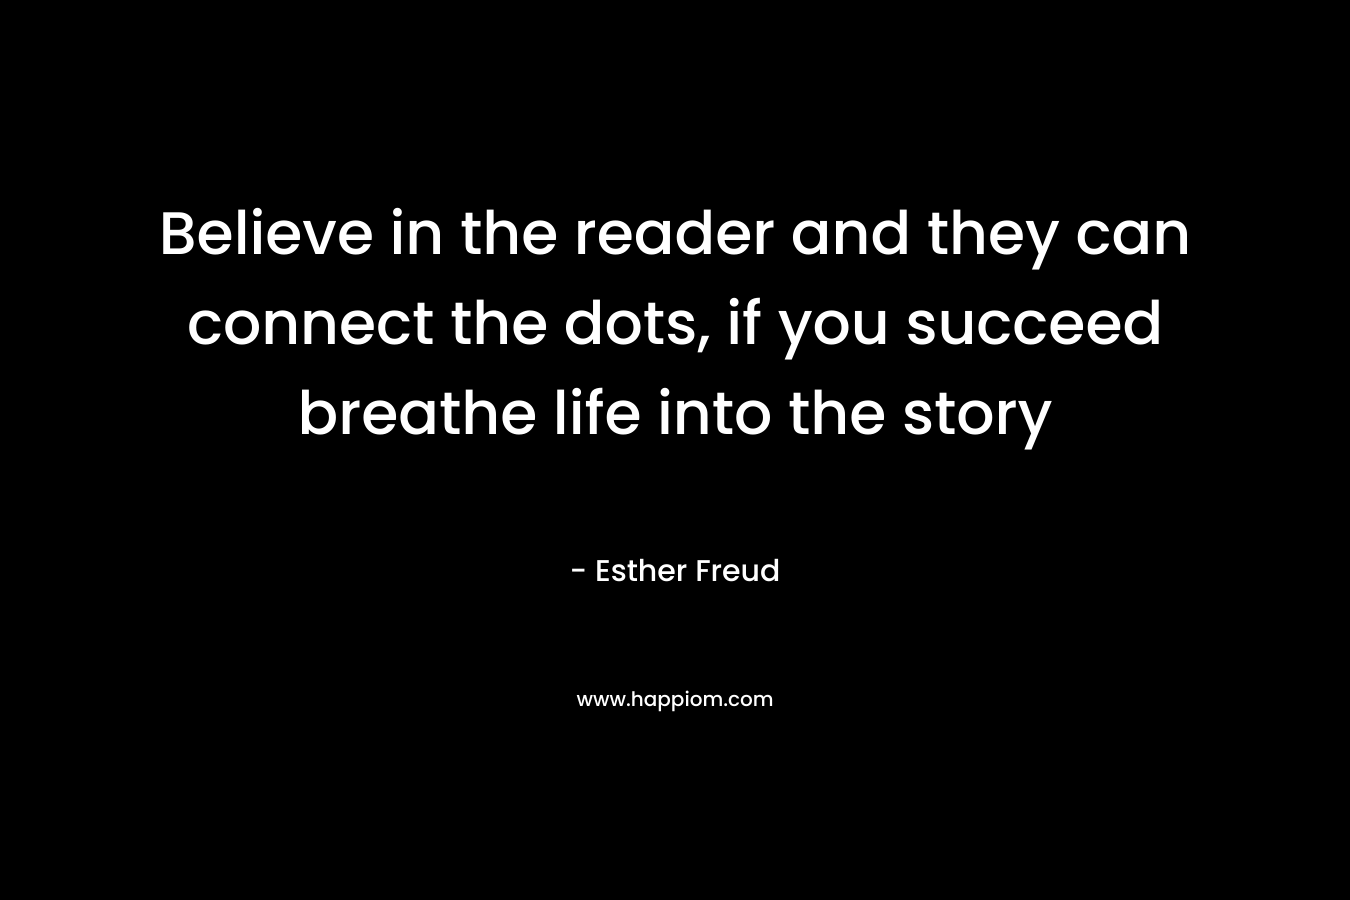 Believe in the reader and they can connect the dots, if you succeed breathe life into the story